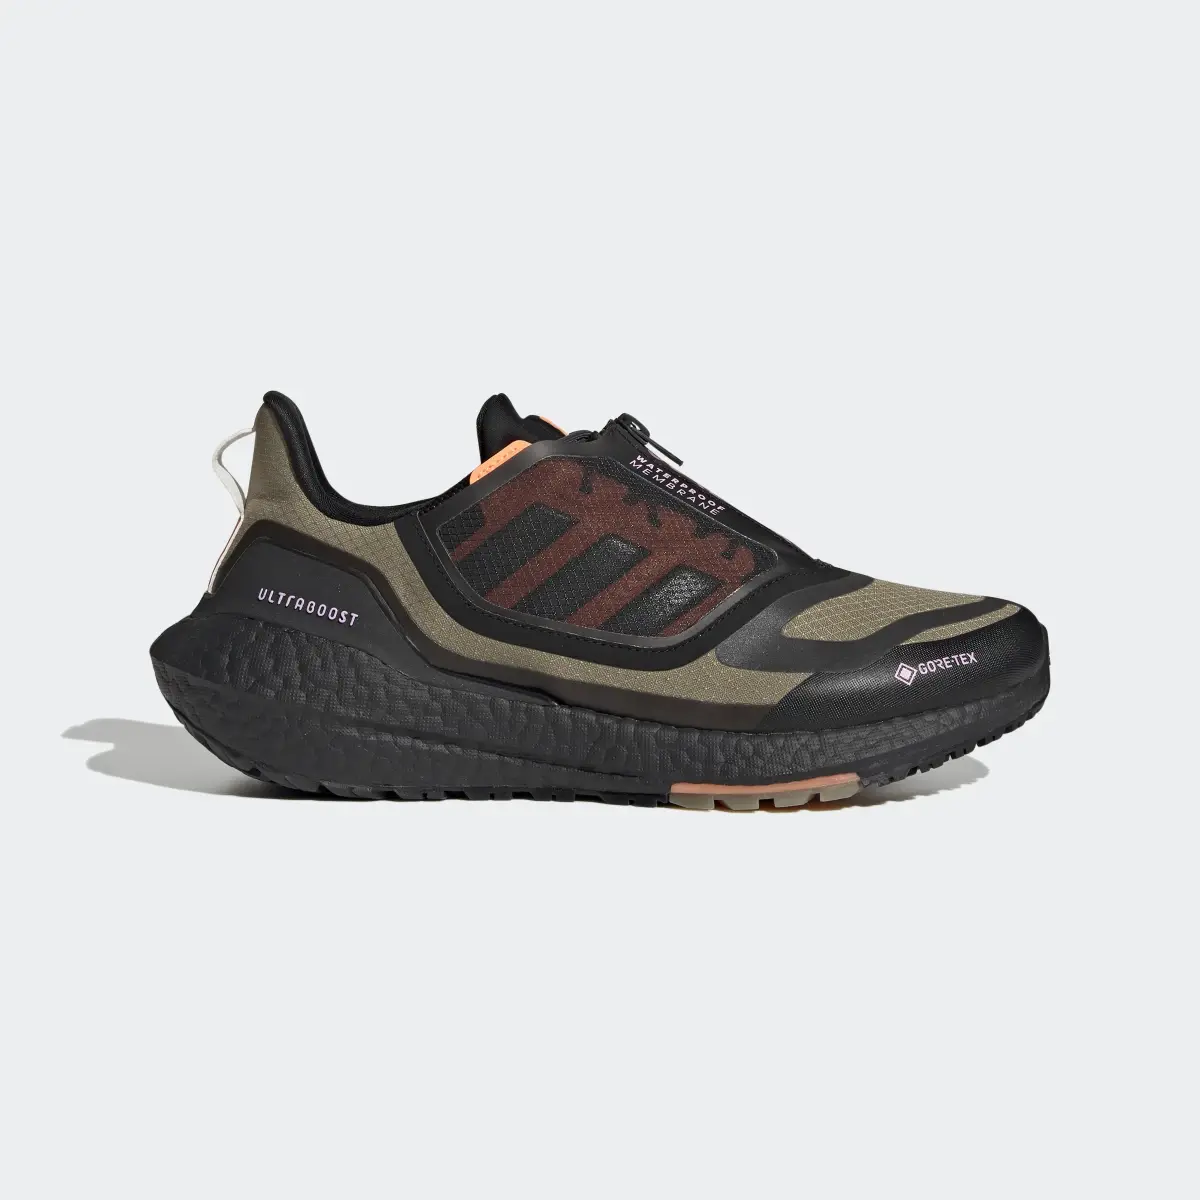 Adidas Ultraboost 22 GORE-TEX Shoes. 2